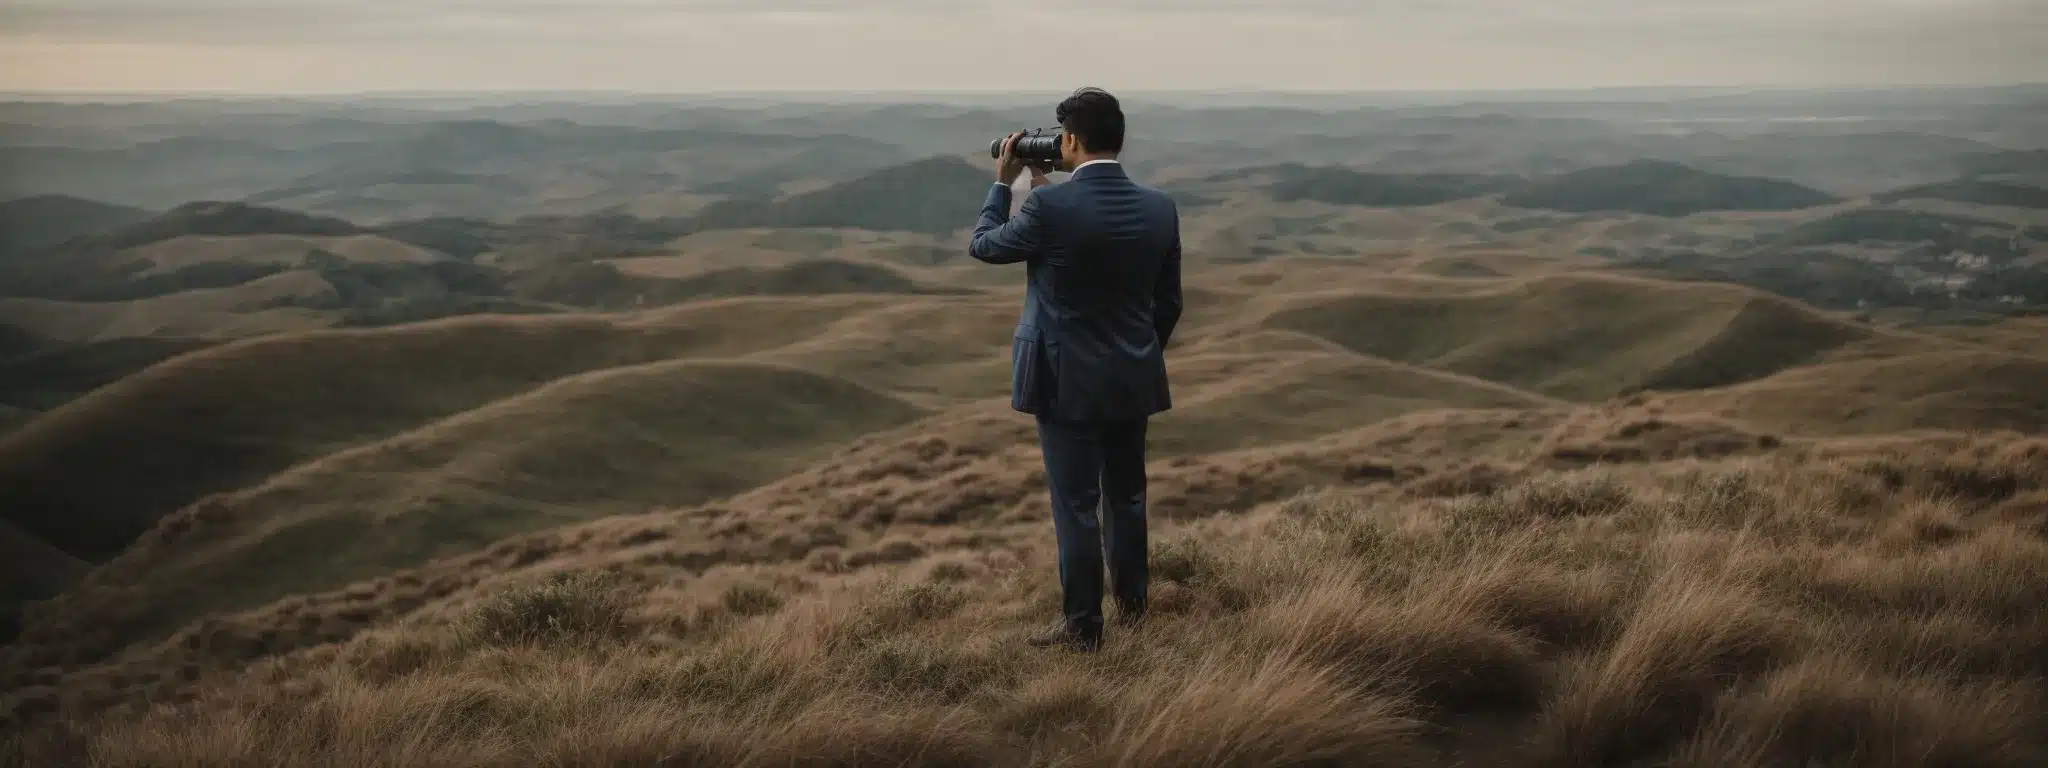 A Businessperson Stands On A Hilltop With A Pair Of Binoculars, Overlooking A Range Of Competitors' Headquarters Scattered Below.